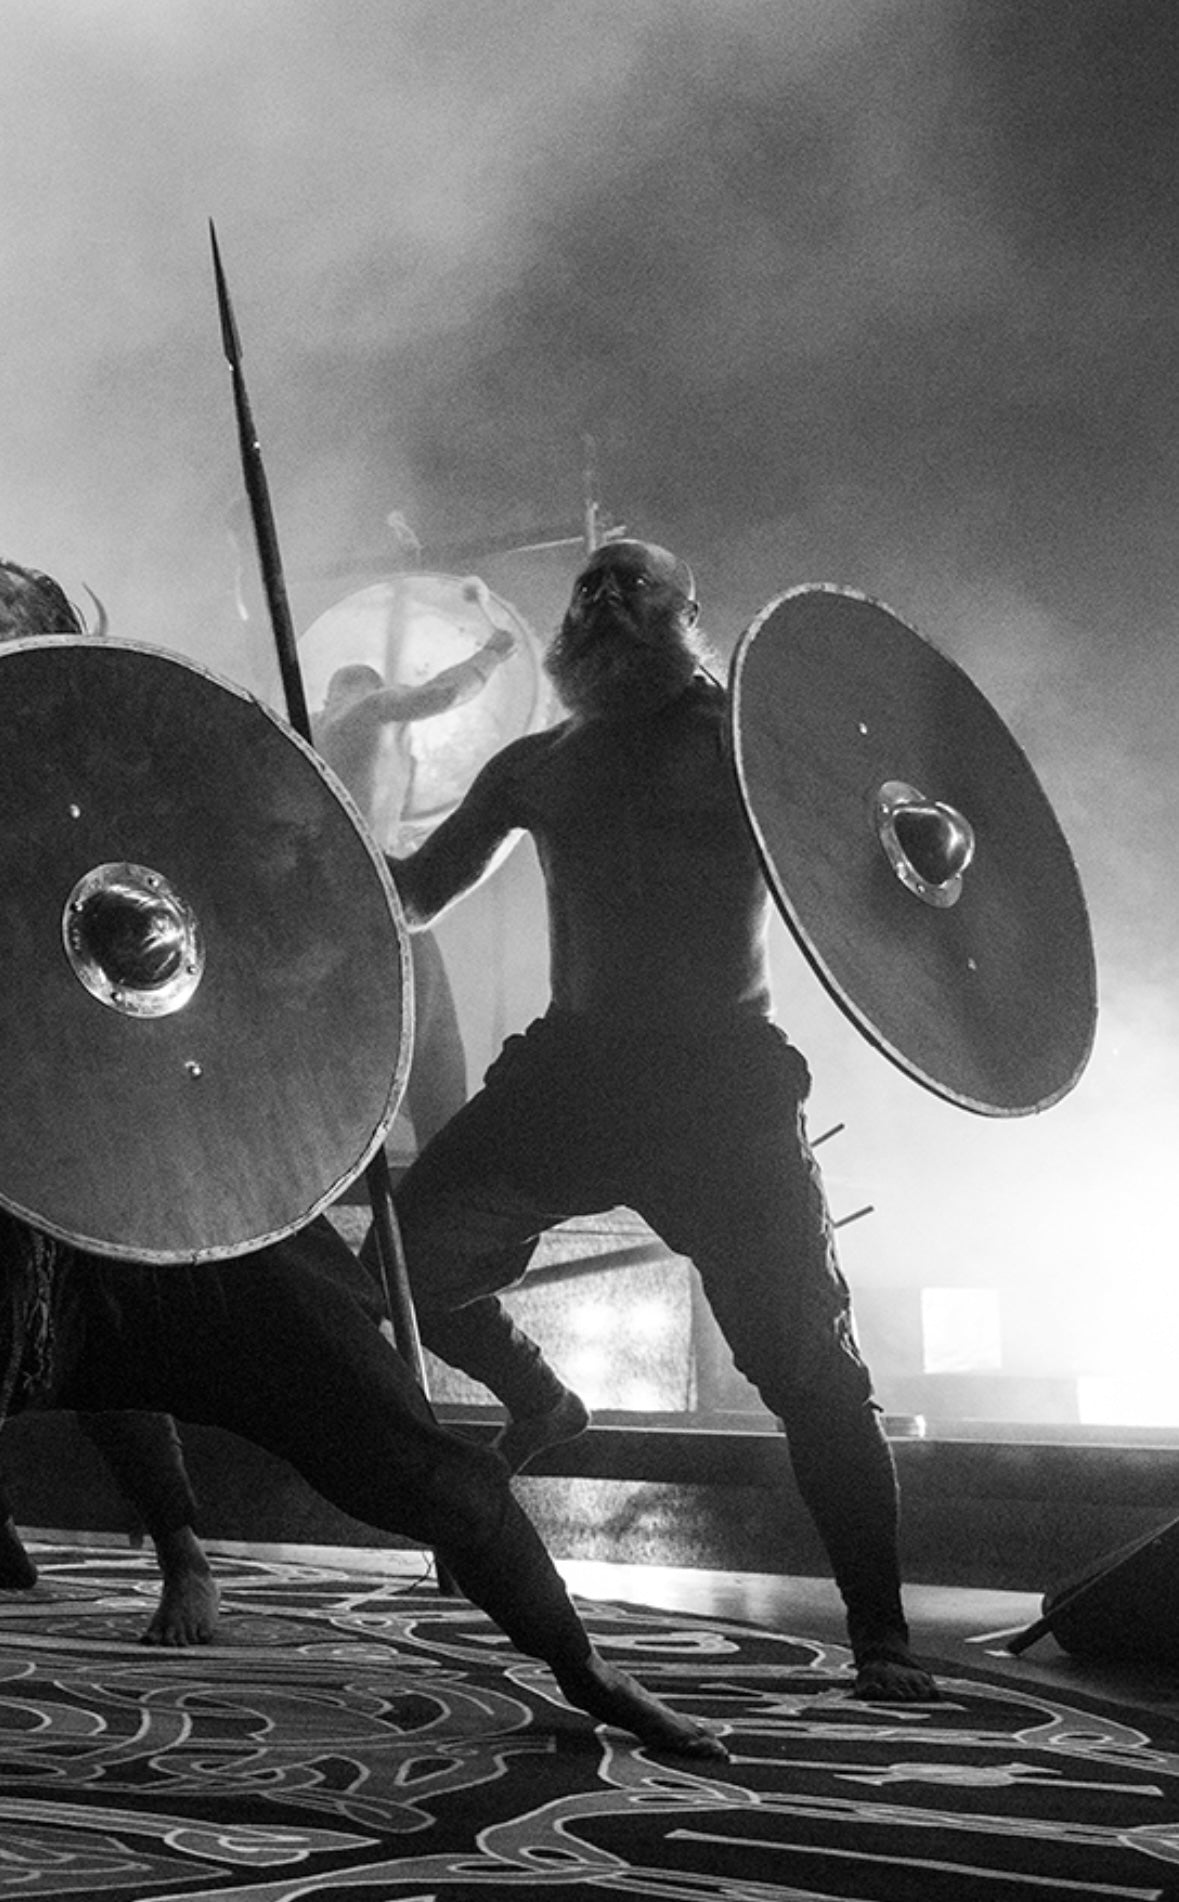 Obban on stage in Heilung ritual